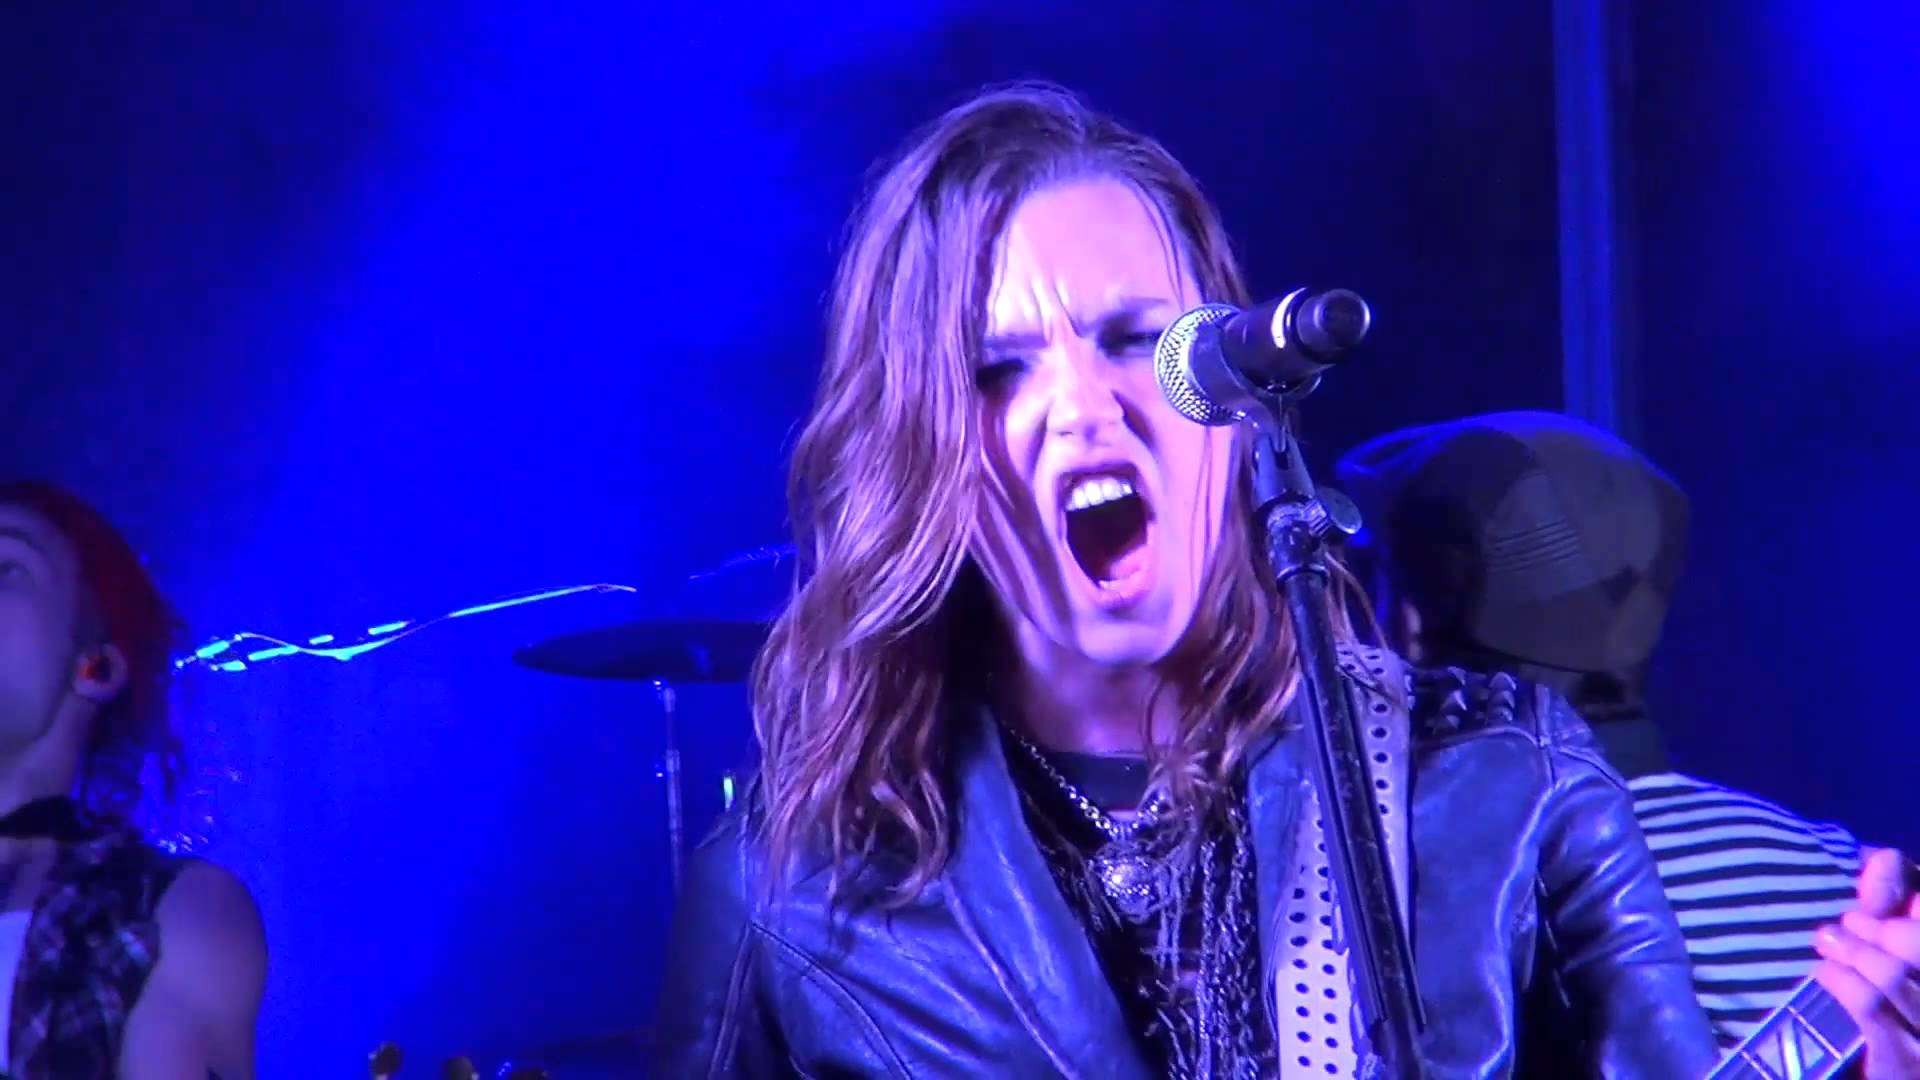 1920x1080 Halestorm - Straight Through The Heart (Dio Cover) Kewanee, IL 2013.07.27 -  YouTube